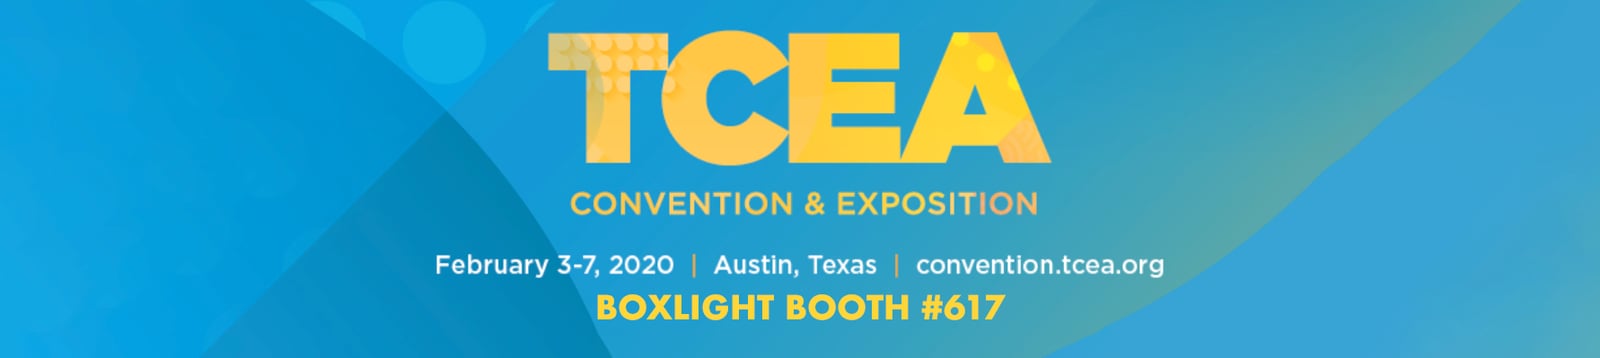 TCEA-CONVENTION-EXPOSITION-2020